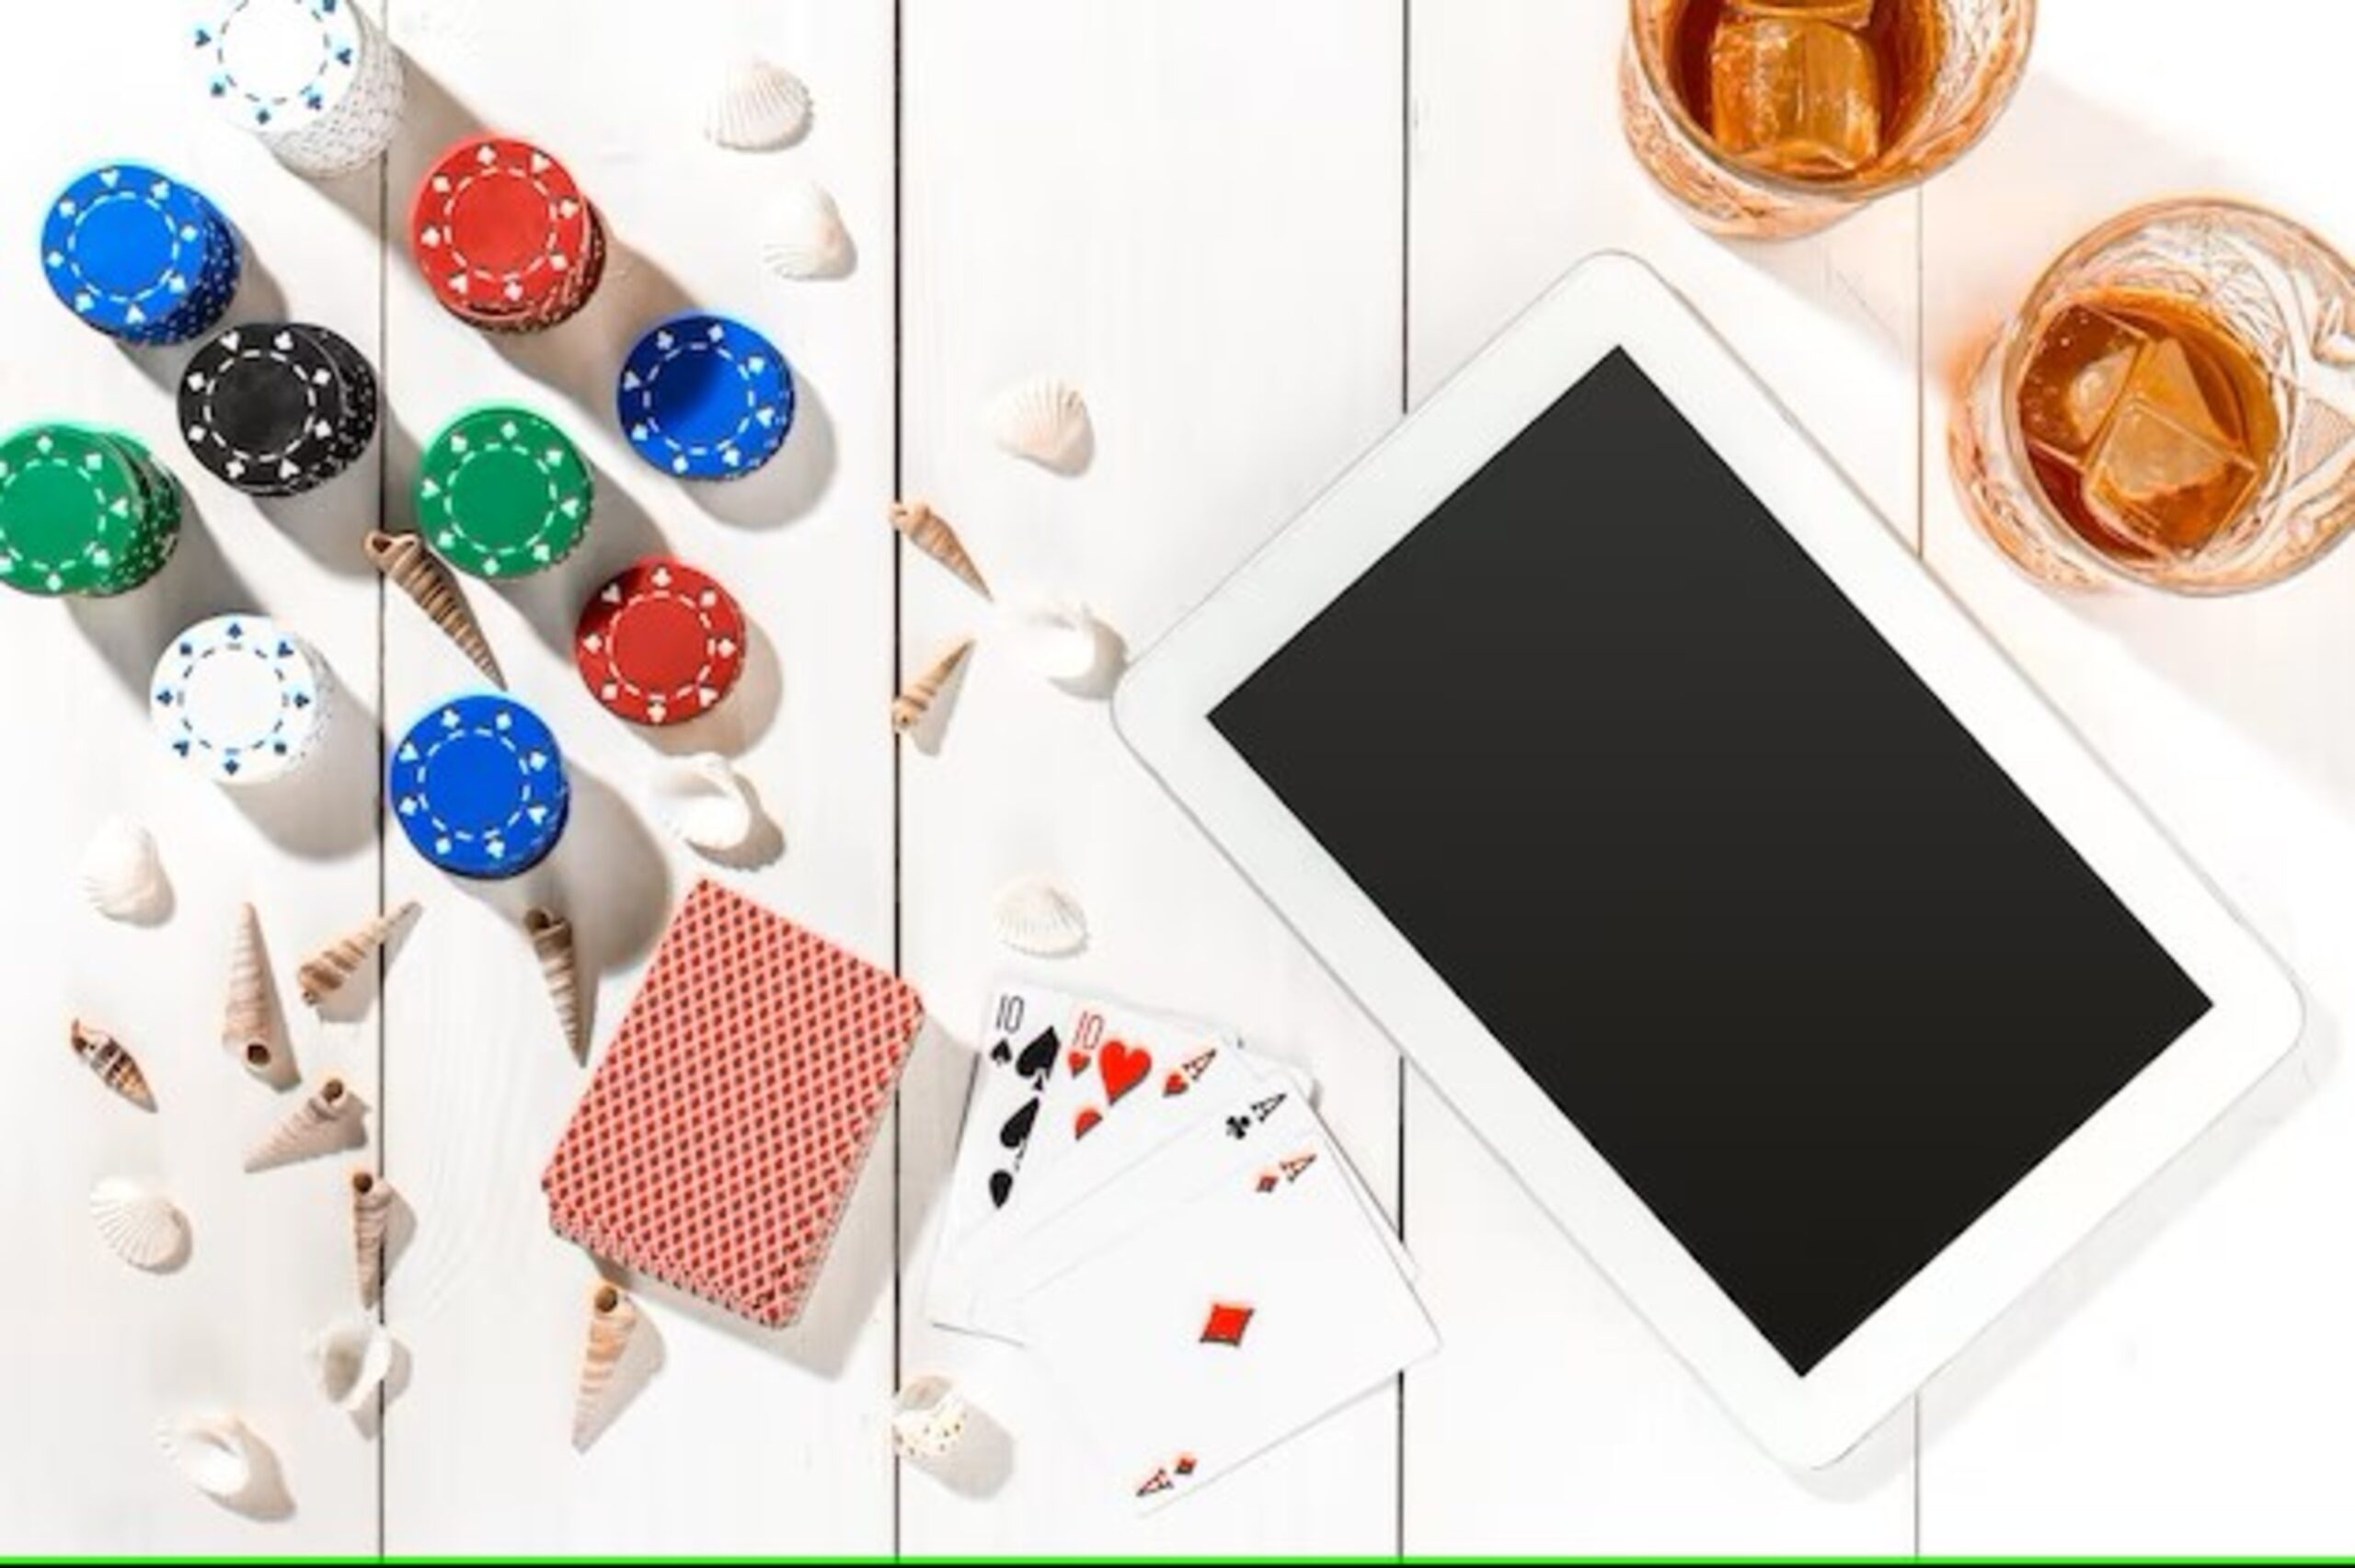 Responsible Gambling in the Digital Age: Tools and Resources